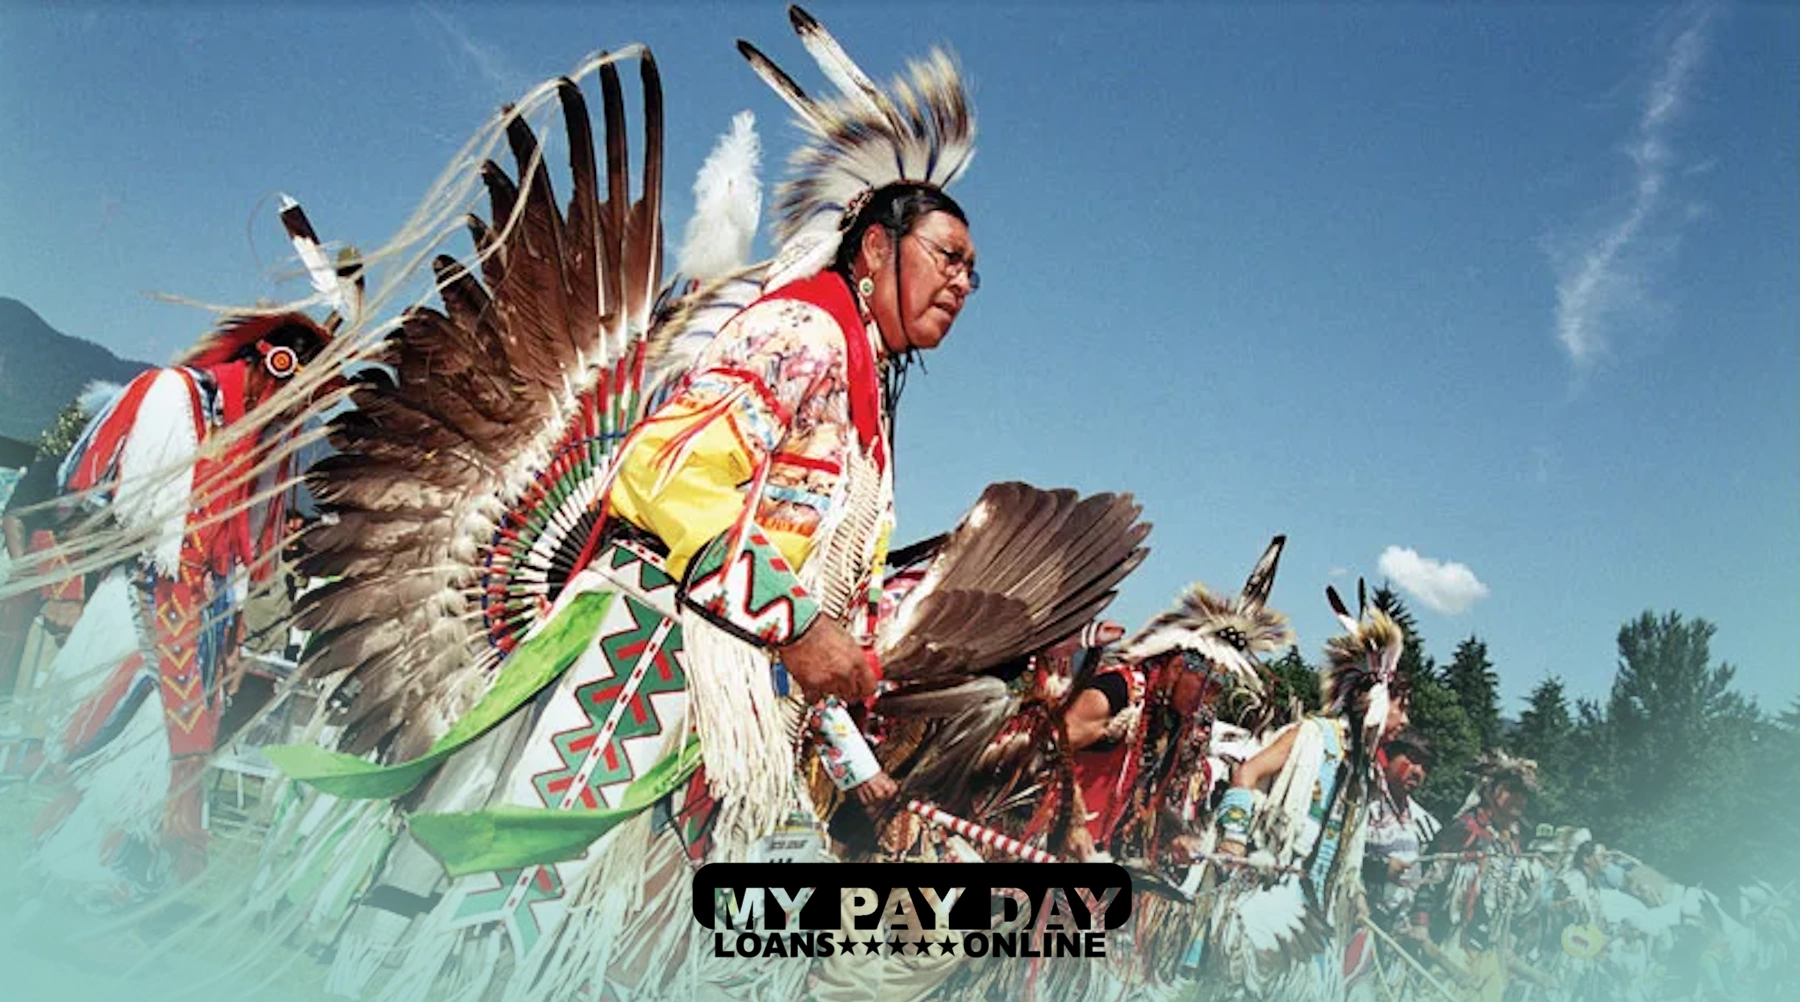 Tribal Payday Loans